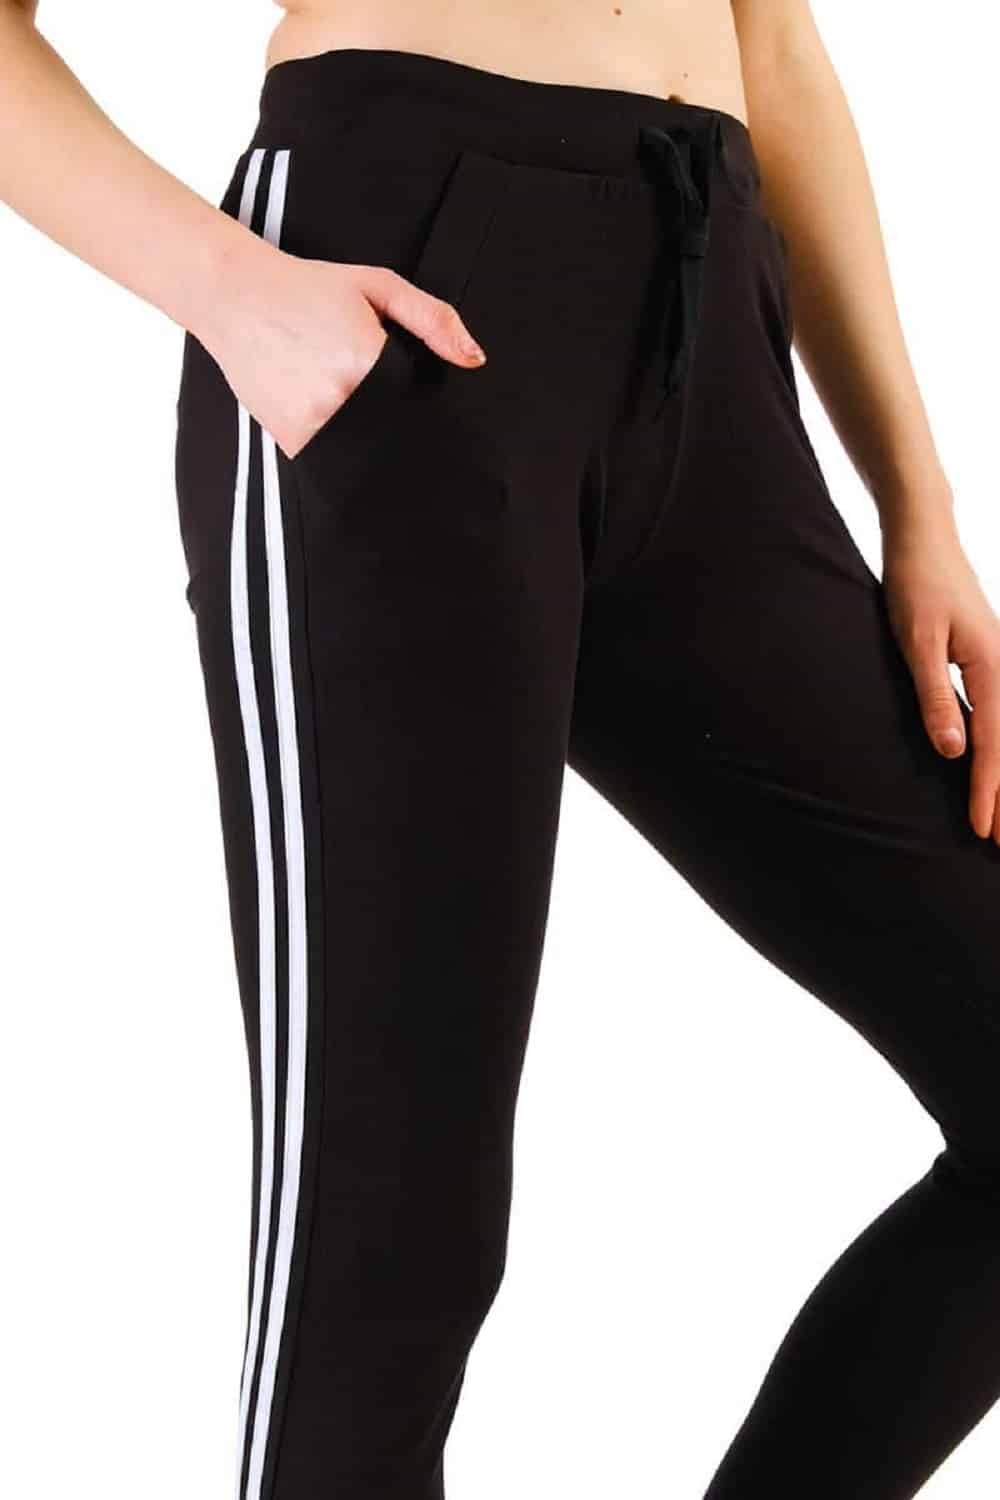 Buy Style Quotient Women White & Black Loose Fit Striped Parallel Trousers -26-White at Amazon.in